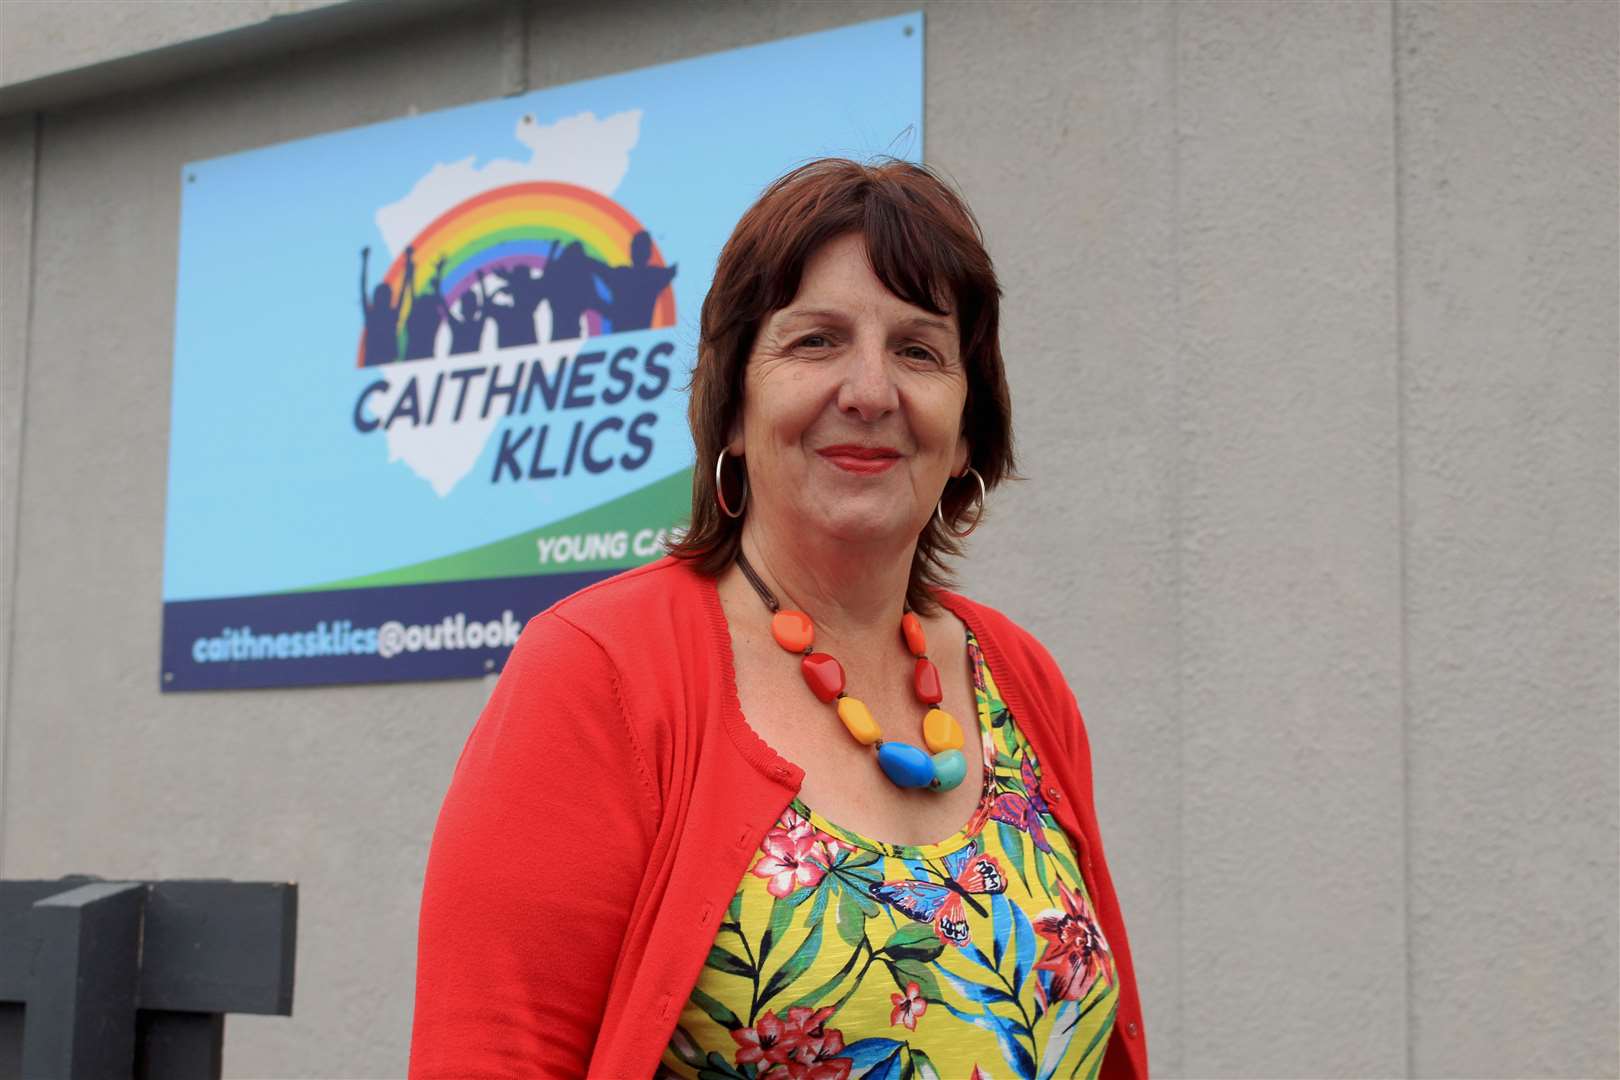 Pat Ramsay, vice-chairperson of Caithness Klics, welcomed the decision.